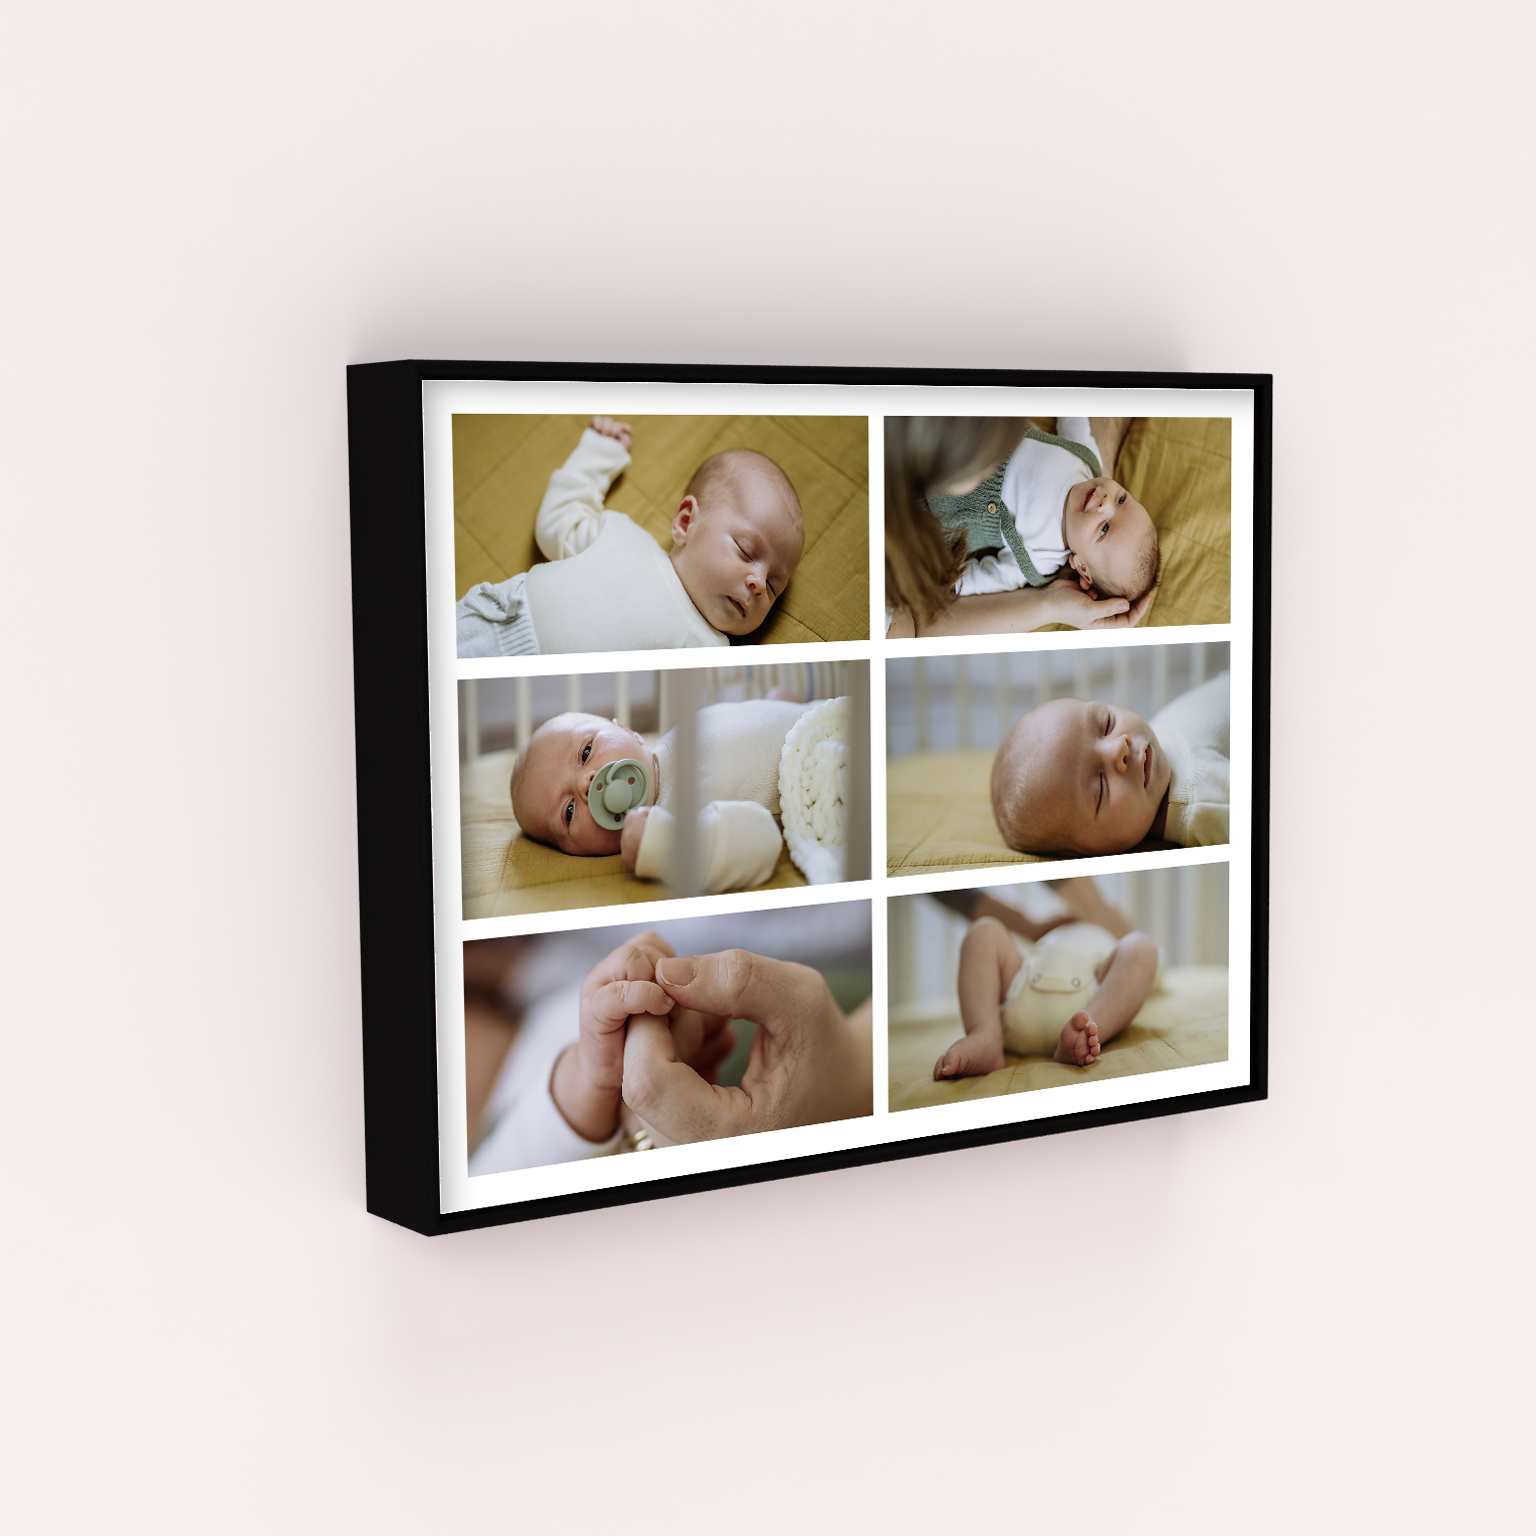  Personalized Deep Frame Photo Prints - Utterly Printable